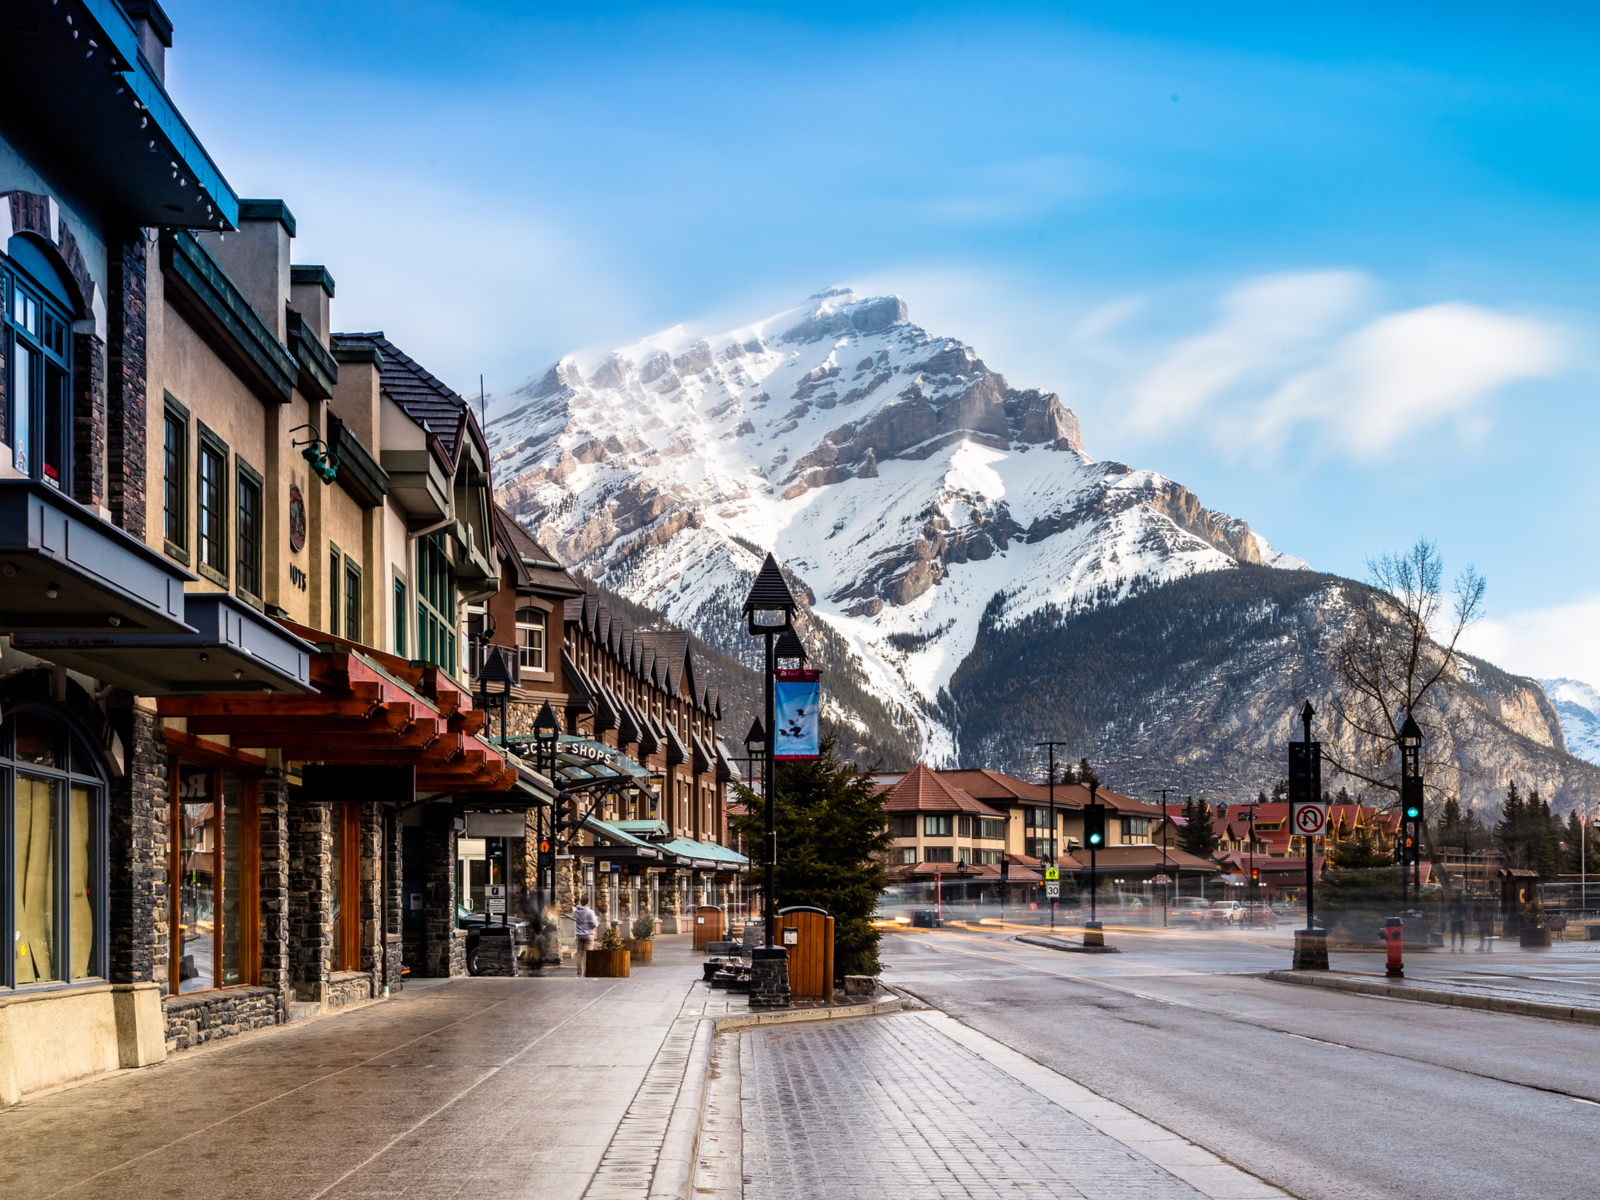 Sky town pictured during the best time to visit Banff